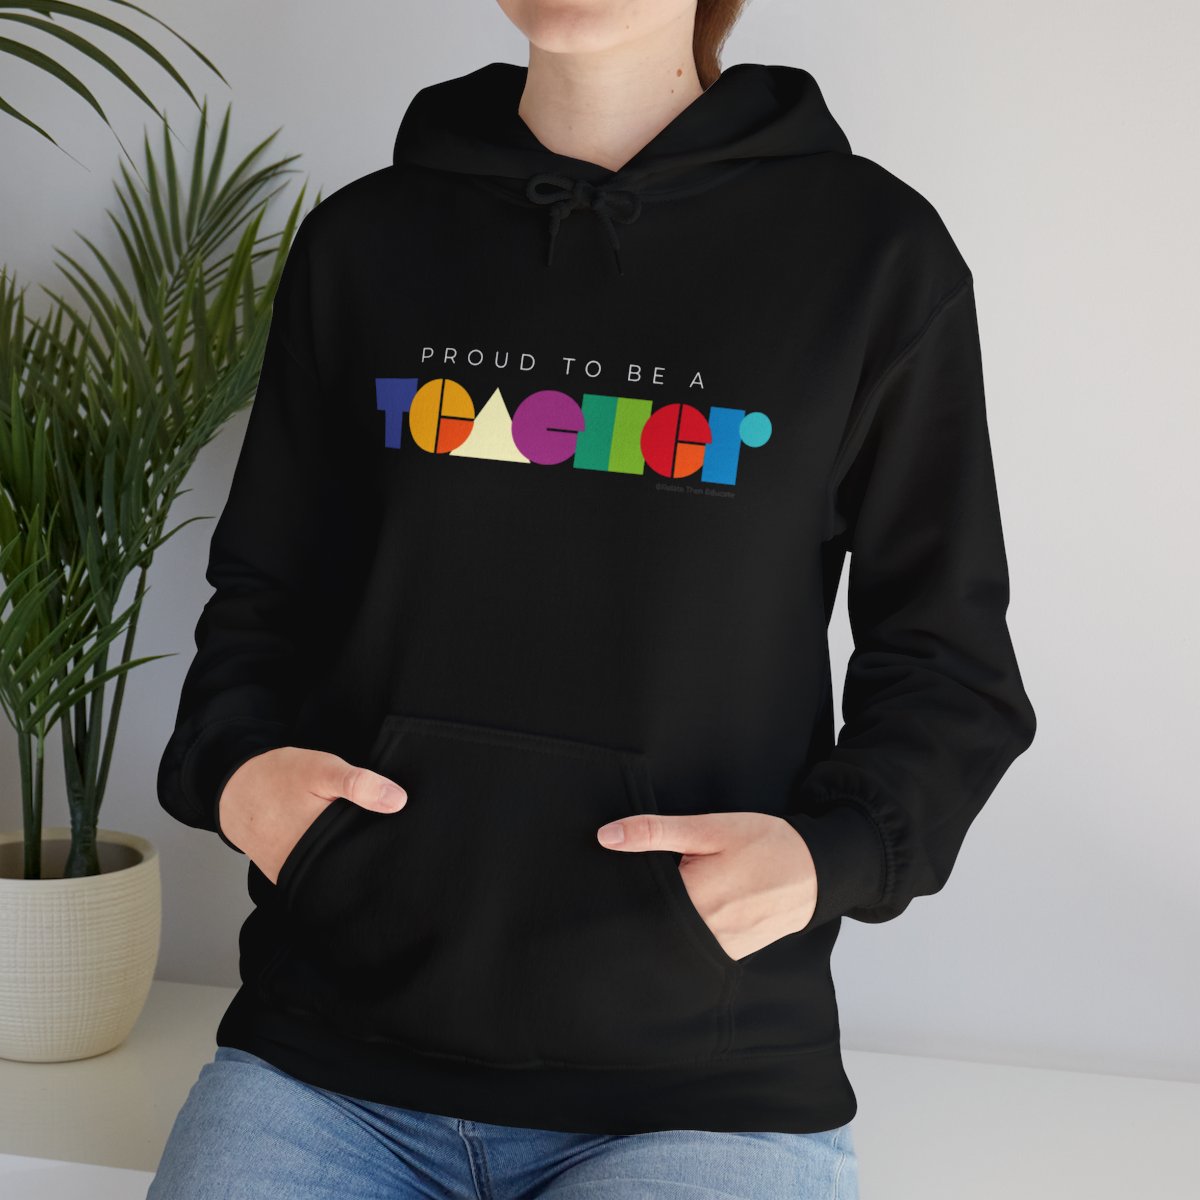 Proud to be a Teacher - Unisex Heavy Blend Hooded Sweatshirt for Teachers product thumbnail image